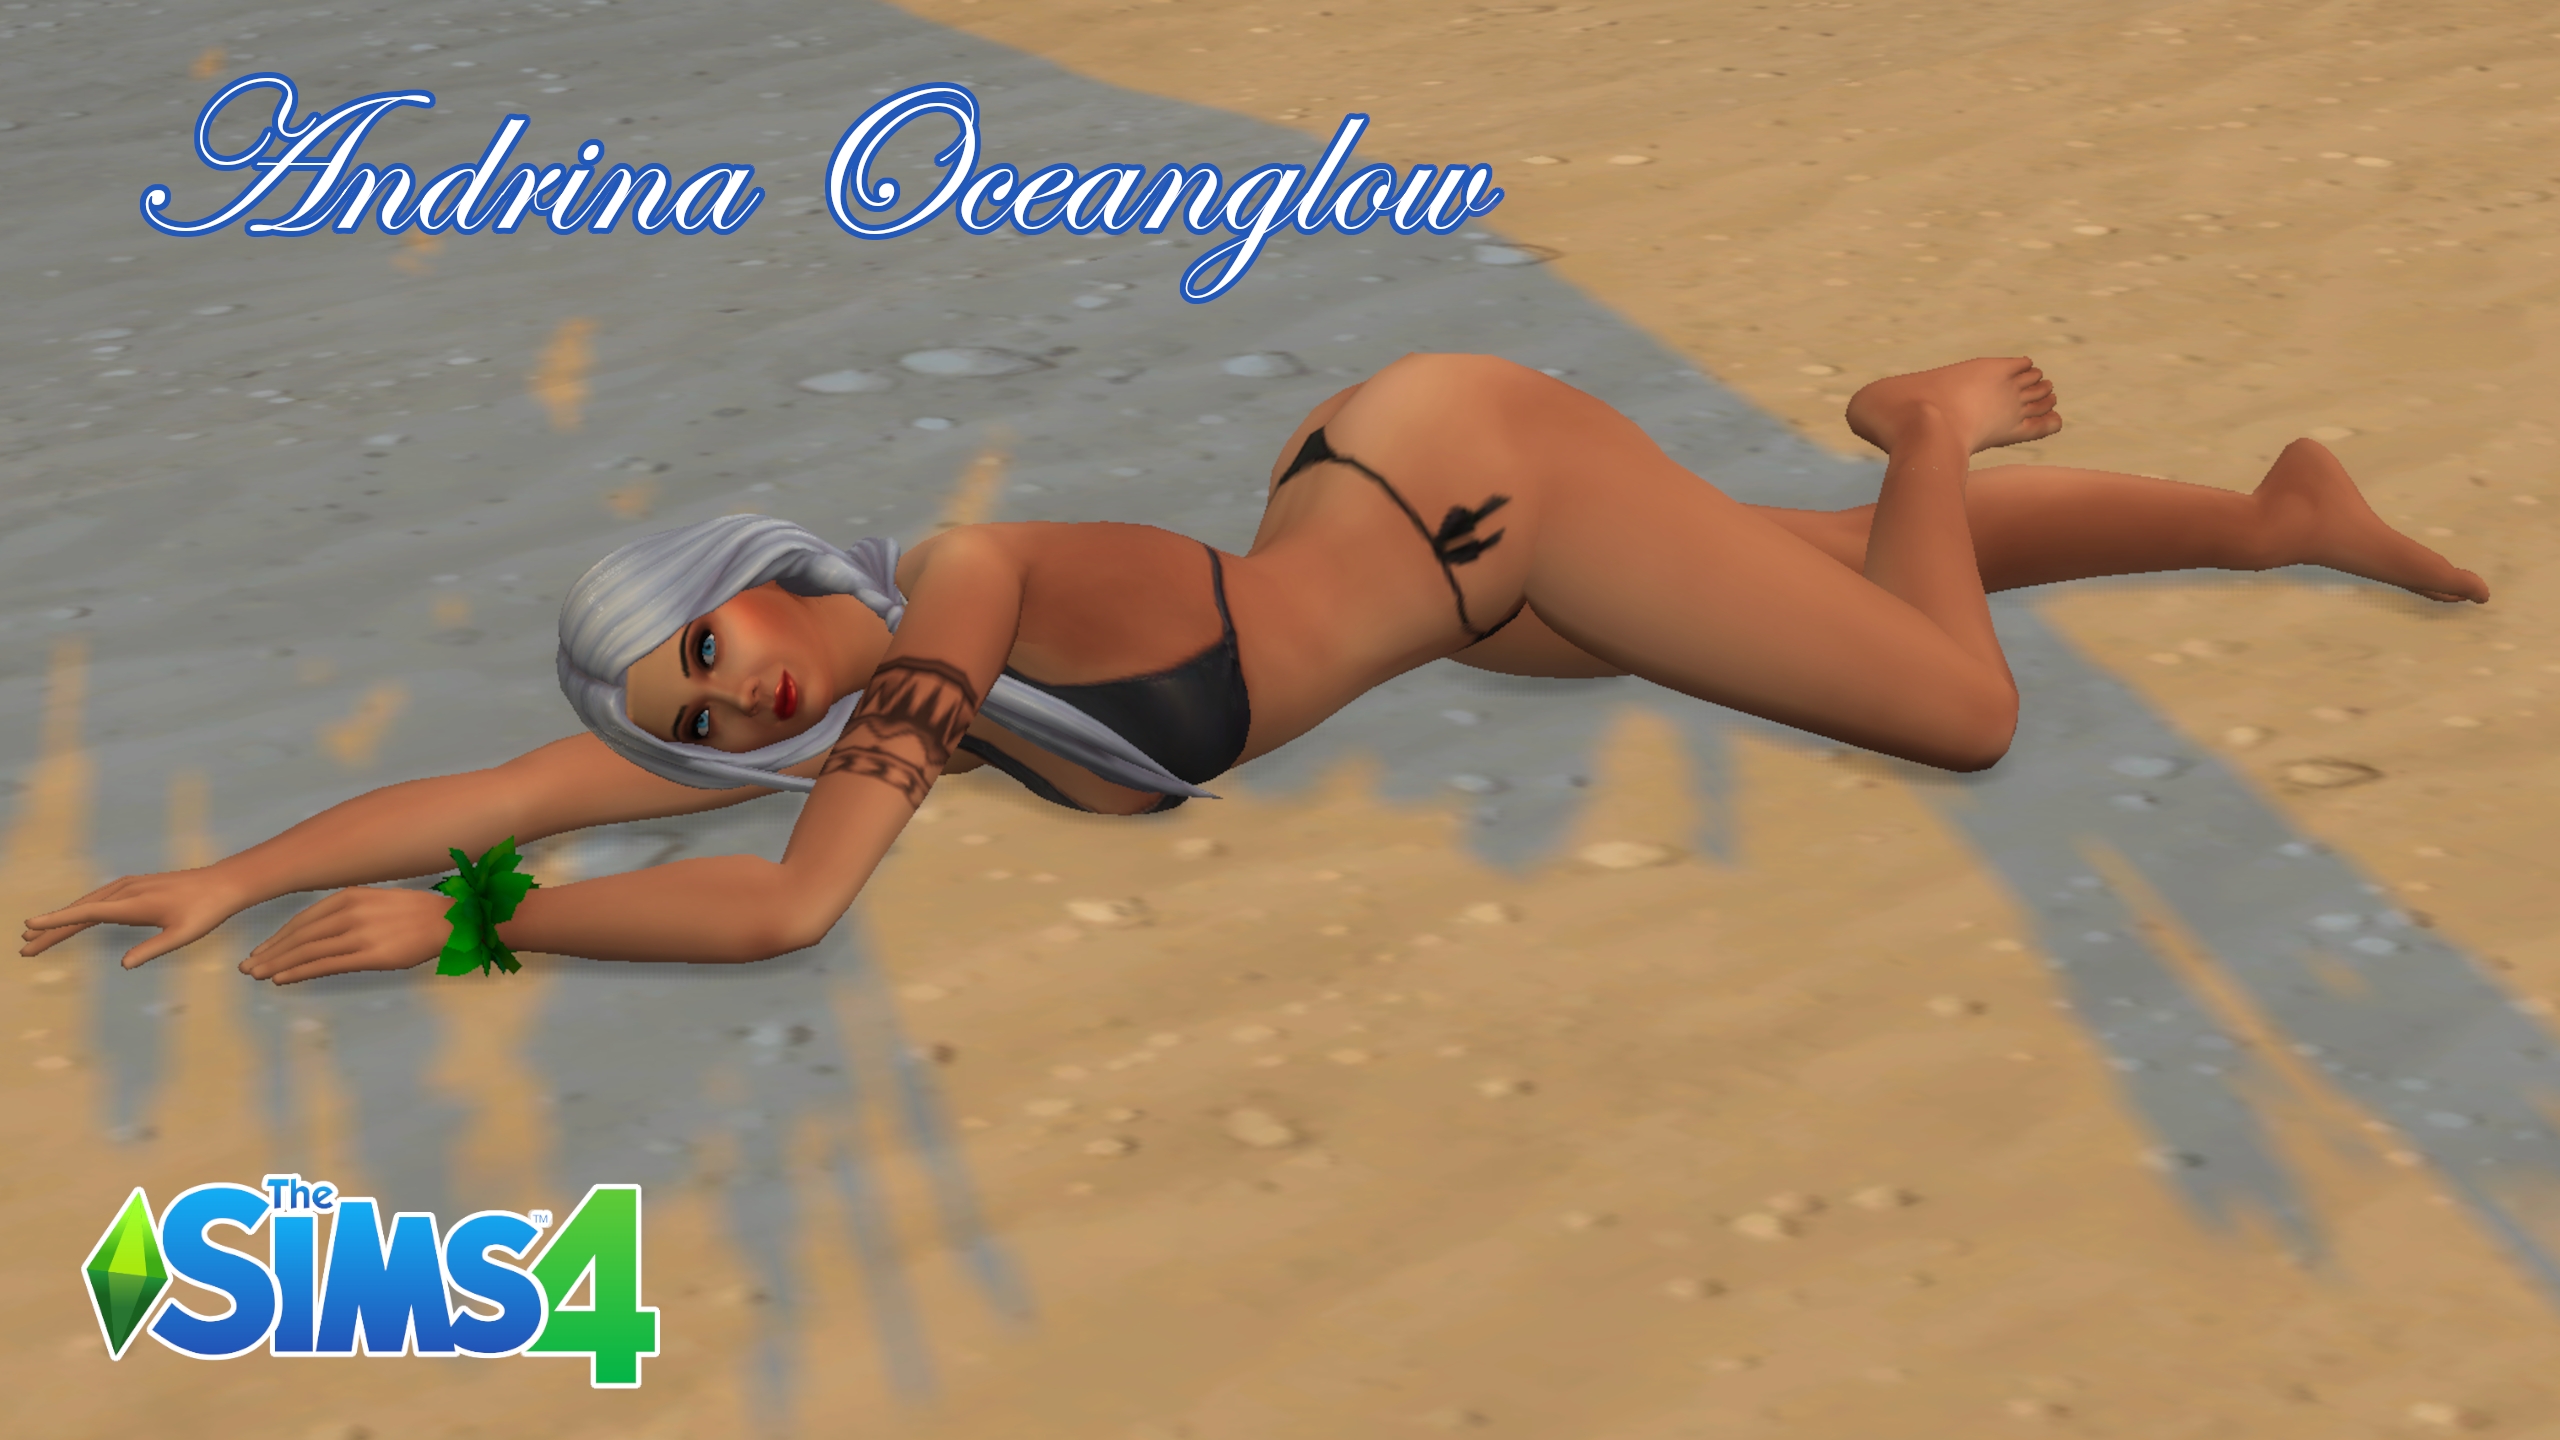 Sims 4 - Mermaid Andrina Oceanglow The Sims 4 Mermaid Siren White Hair Bustyfemale Thong Big Ass Toned Female Topless 3